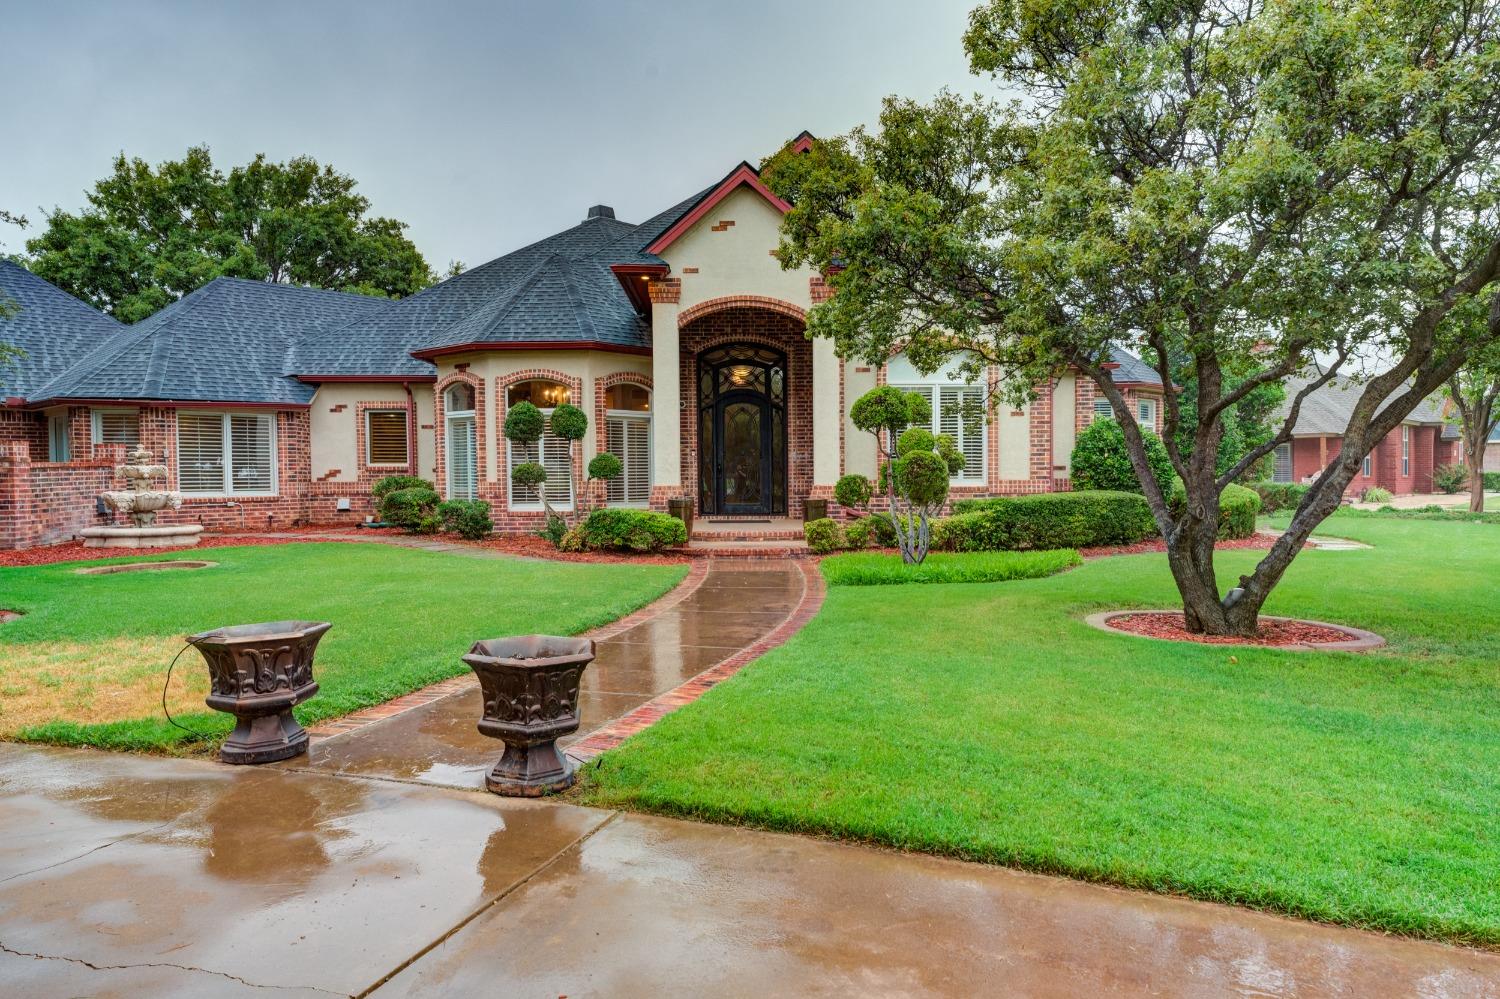 ***OPEN HOUSE Saturday 1-3 PM** A rare find in Llano Estates. LOW TAXES just outside of the city limits. 4 bedrooms, 3 bathrooms, 2 dining areas, sunroom, basement theater, and 5 garage spaces. This home is truly one of a kind and you won't find another like it. You have to see it in person to appreciate it!